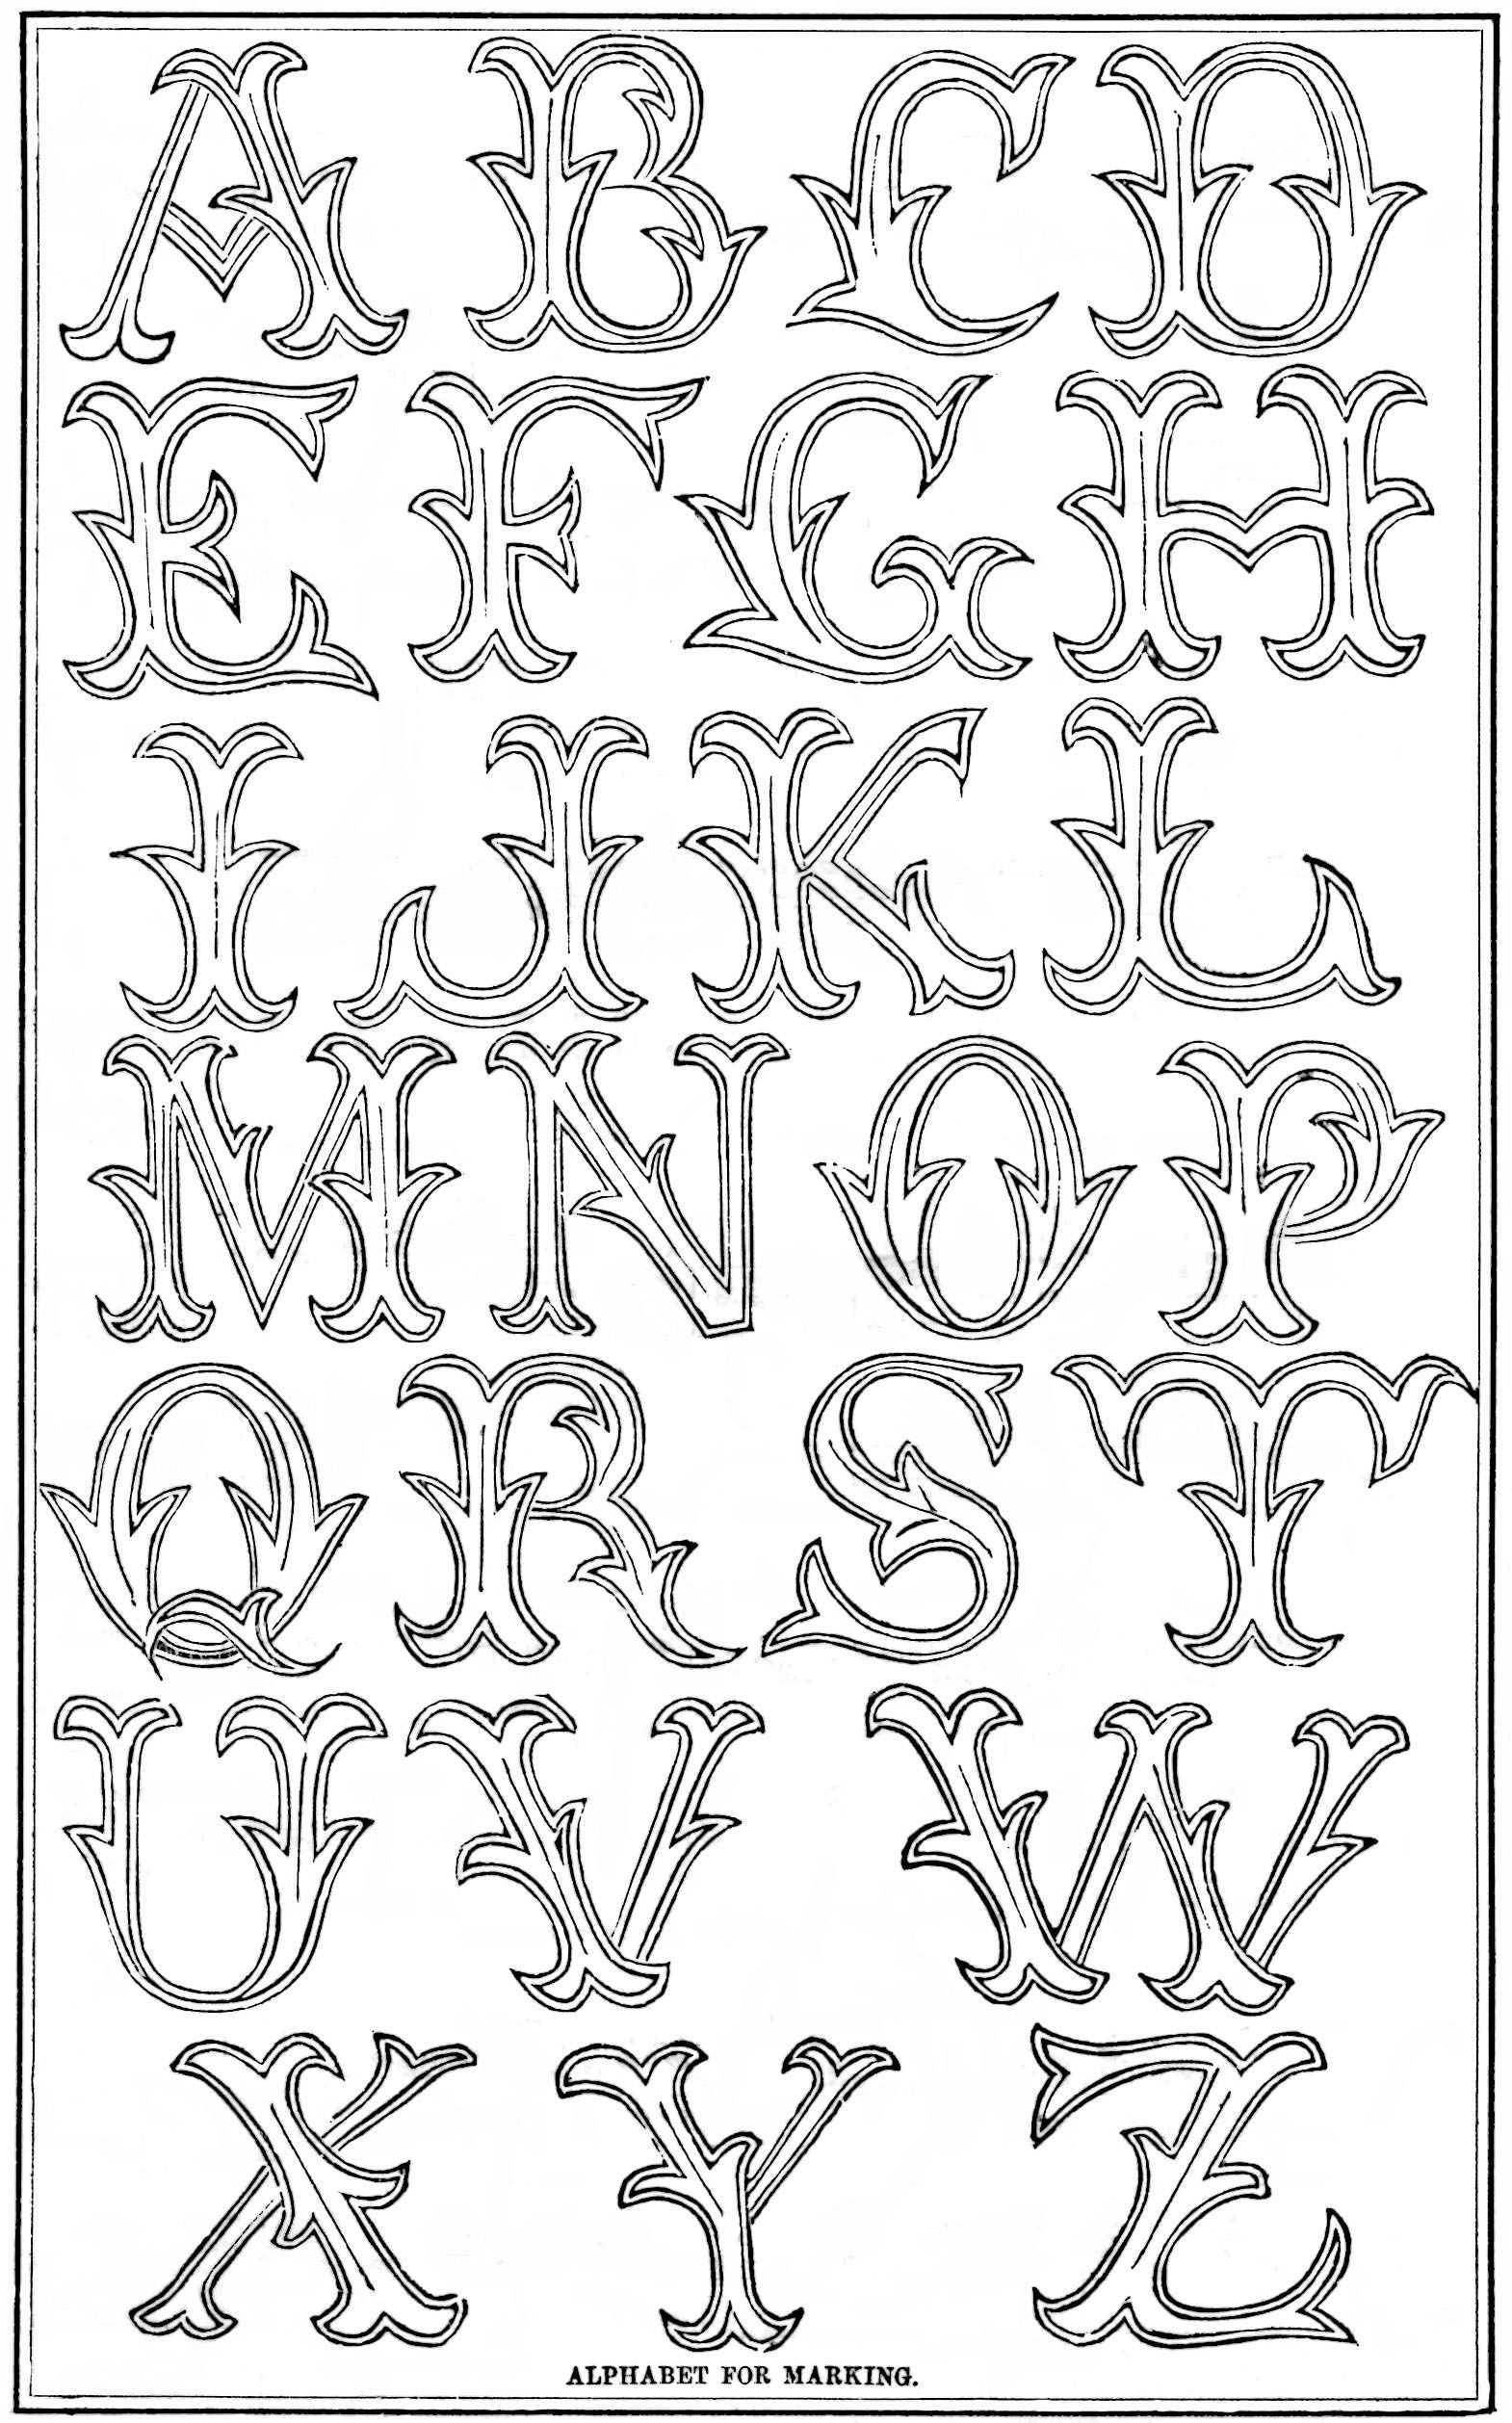 Embroidery Alphabet Pattern Fancy Antique Alphabet Patterns For Embroidery Monograms Vintage